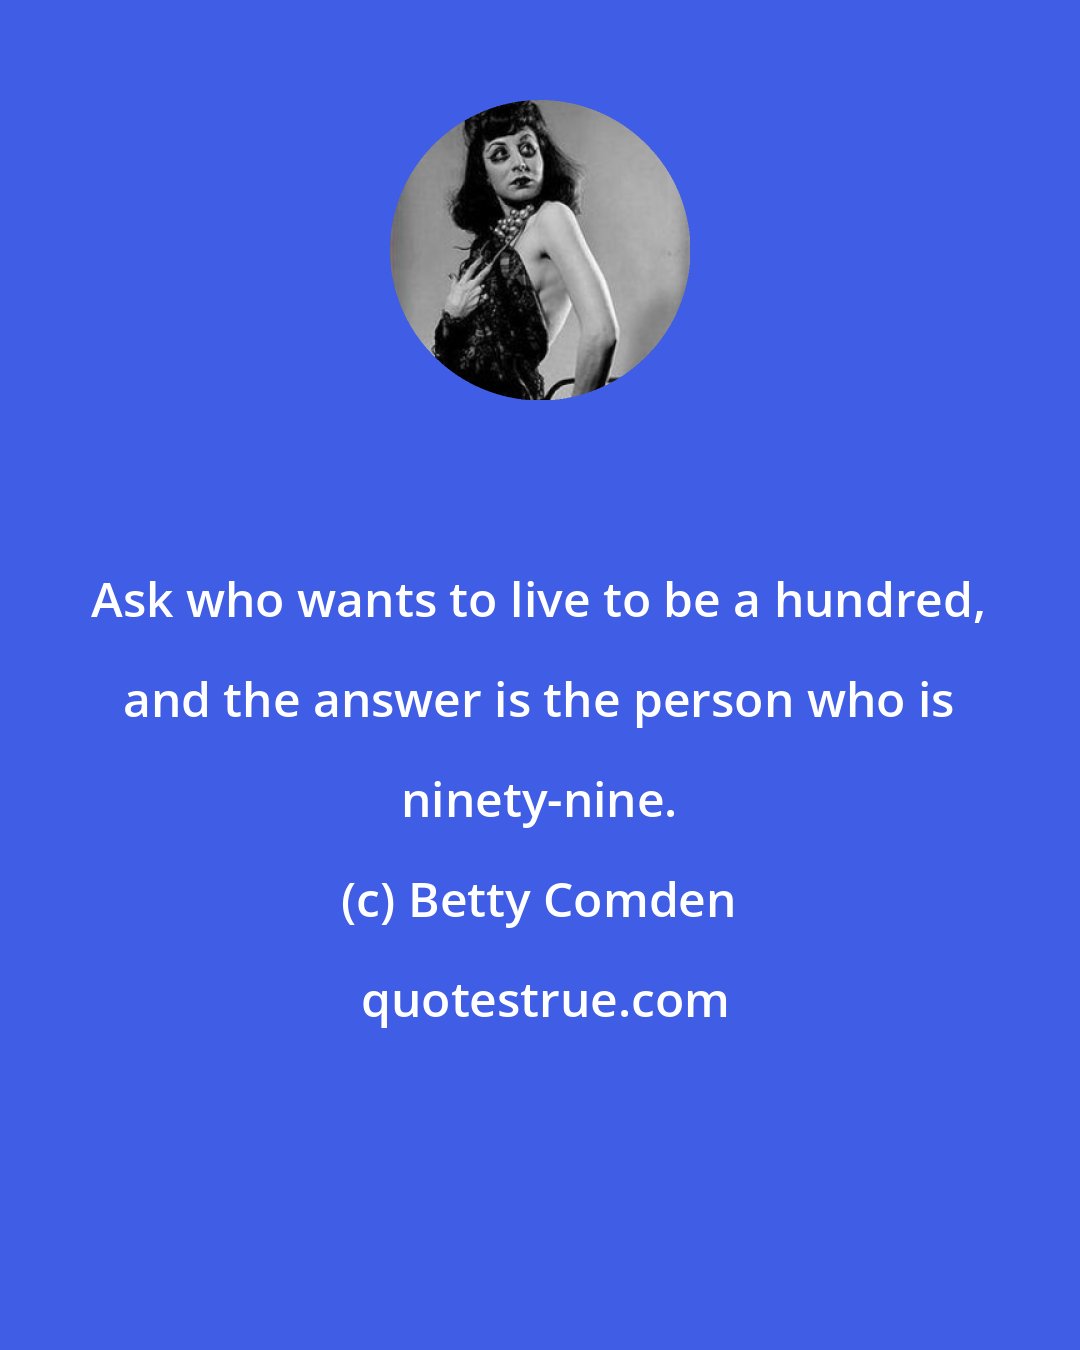 Betty Comden: Ask who wants to live to be a hundred, and the answer is the person who is ninety-nine.